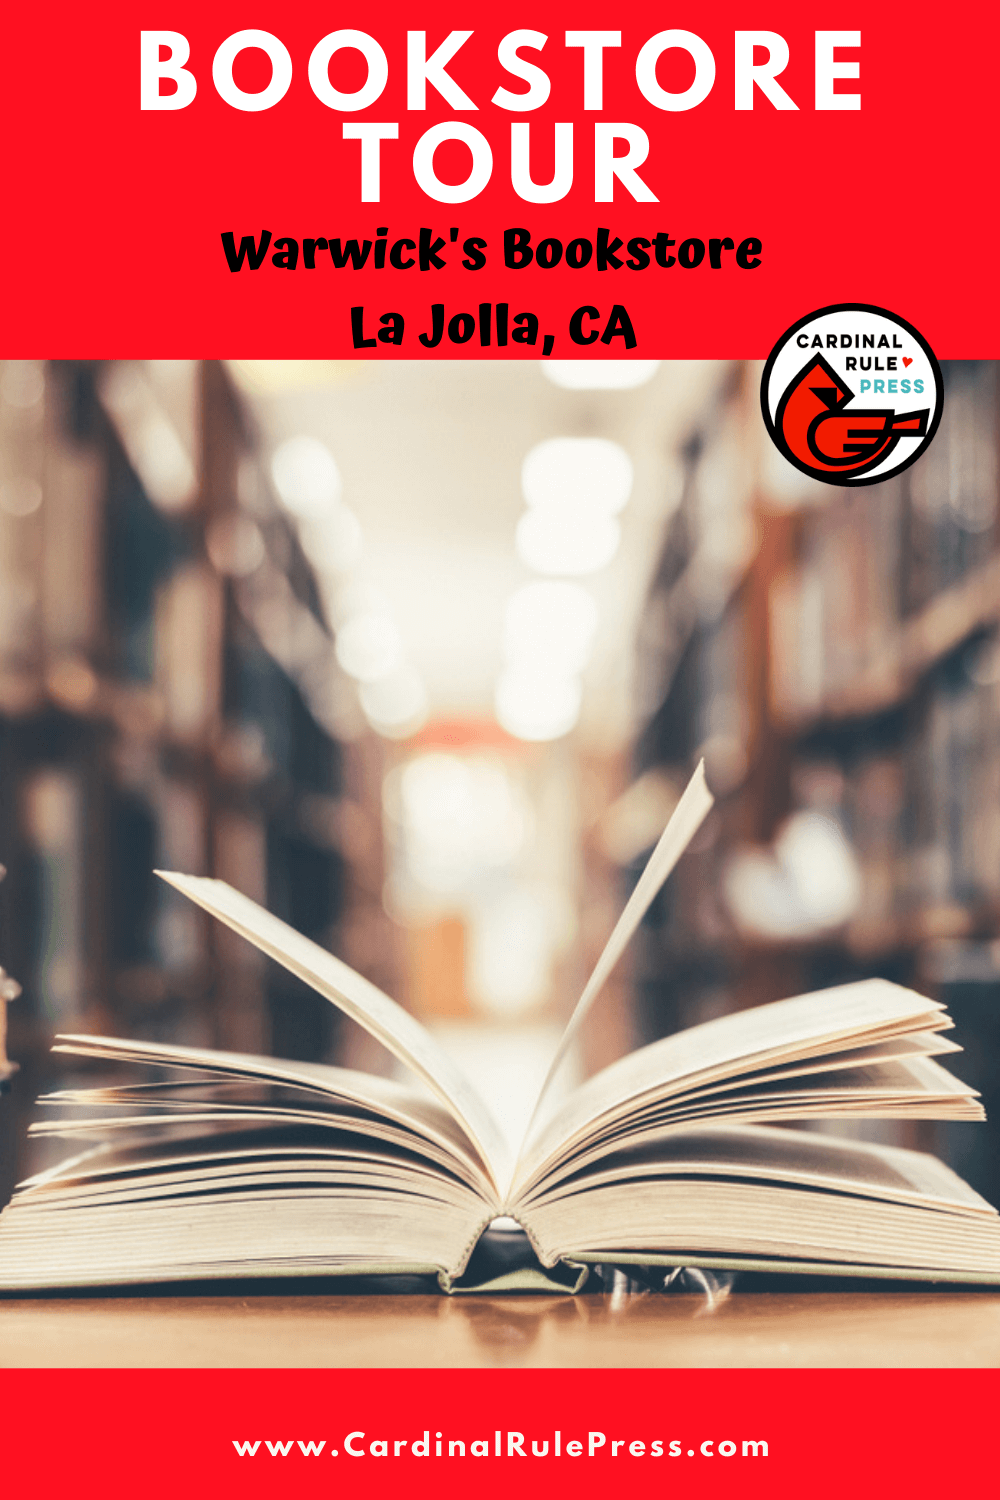 Summer Bookstore Tour: Warwick's in La Jolla, CA - We got to take an inside look into these creative spaces that house our favorite things---books and books and readers!
#Bookstore #BookstoreTour #WarwicksBookstore